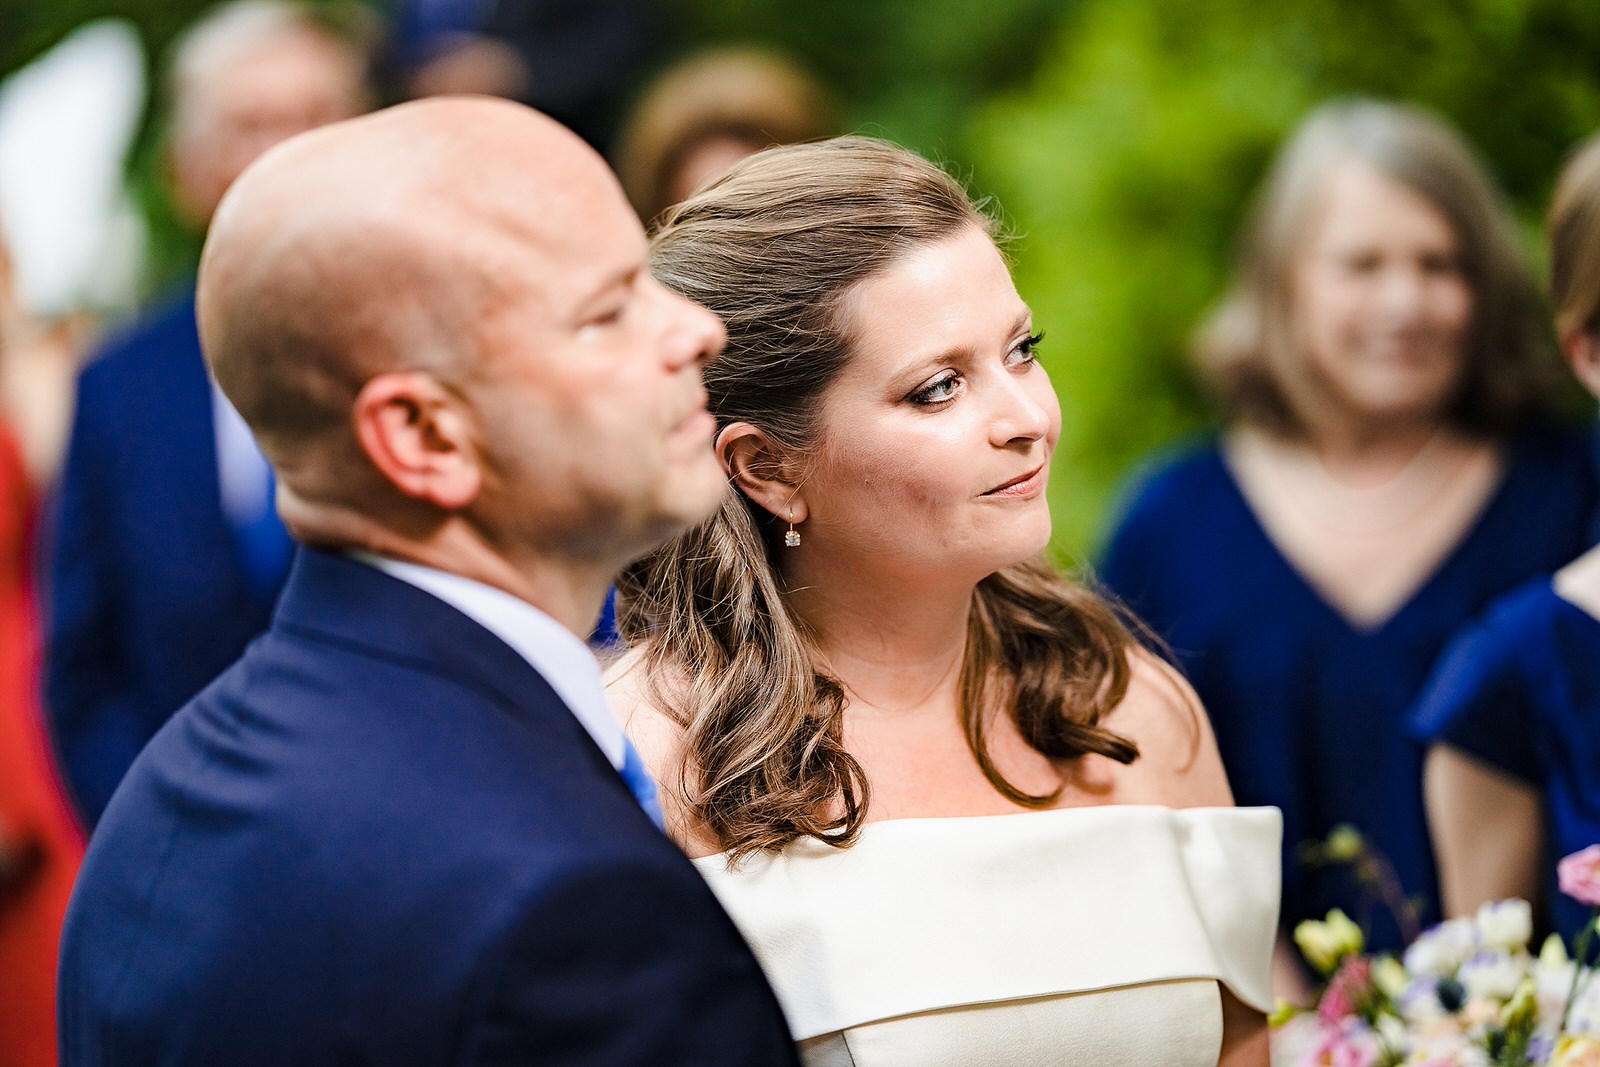 Bride and groom listen to pastor speaking about love during wedding ceremony